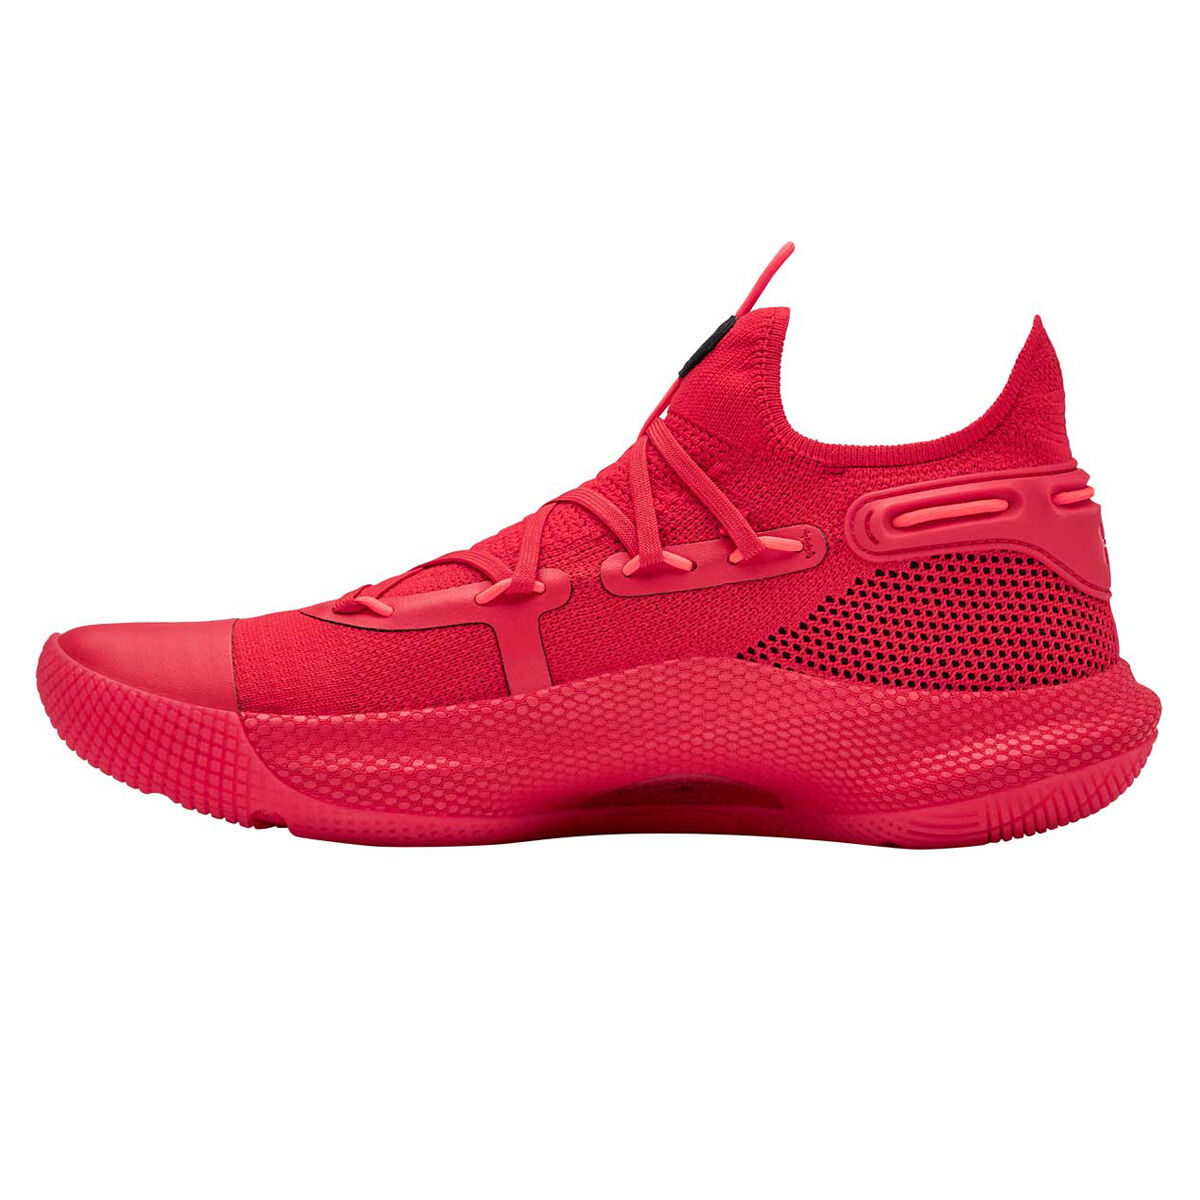 curry 6 men's basketball shoes